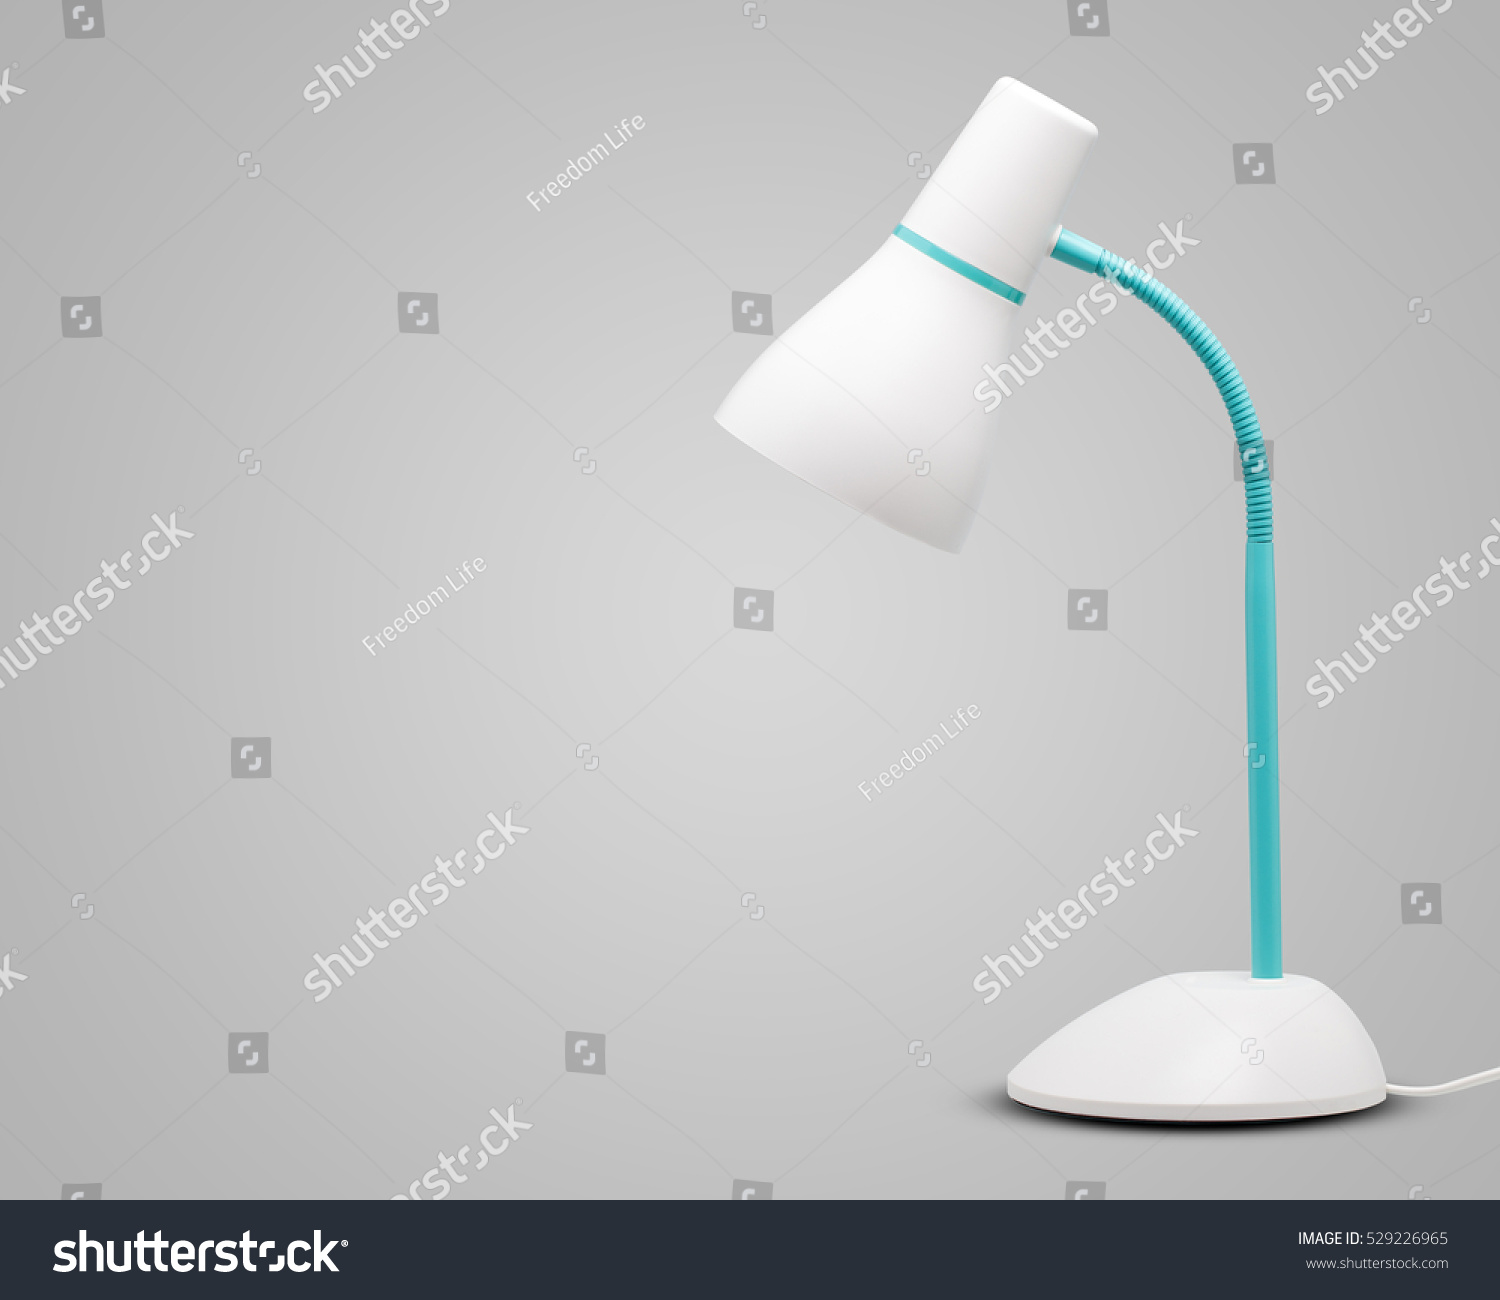 Desk Lamp Isolated On Gray Background Stock Photo Edit Now 529226965